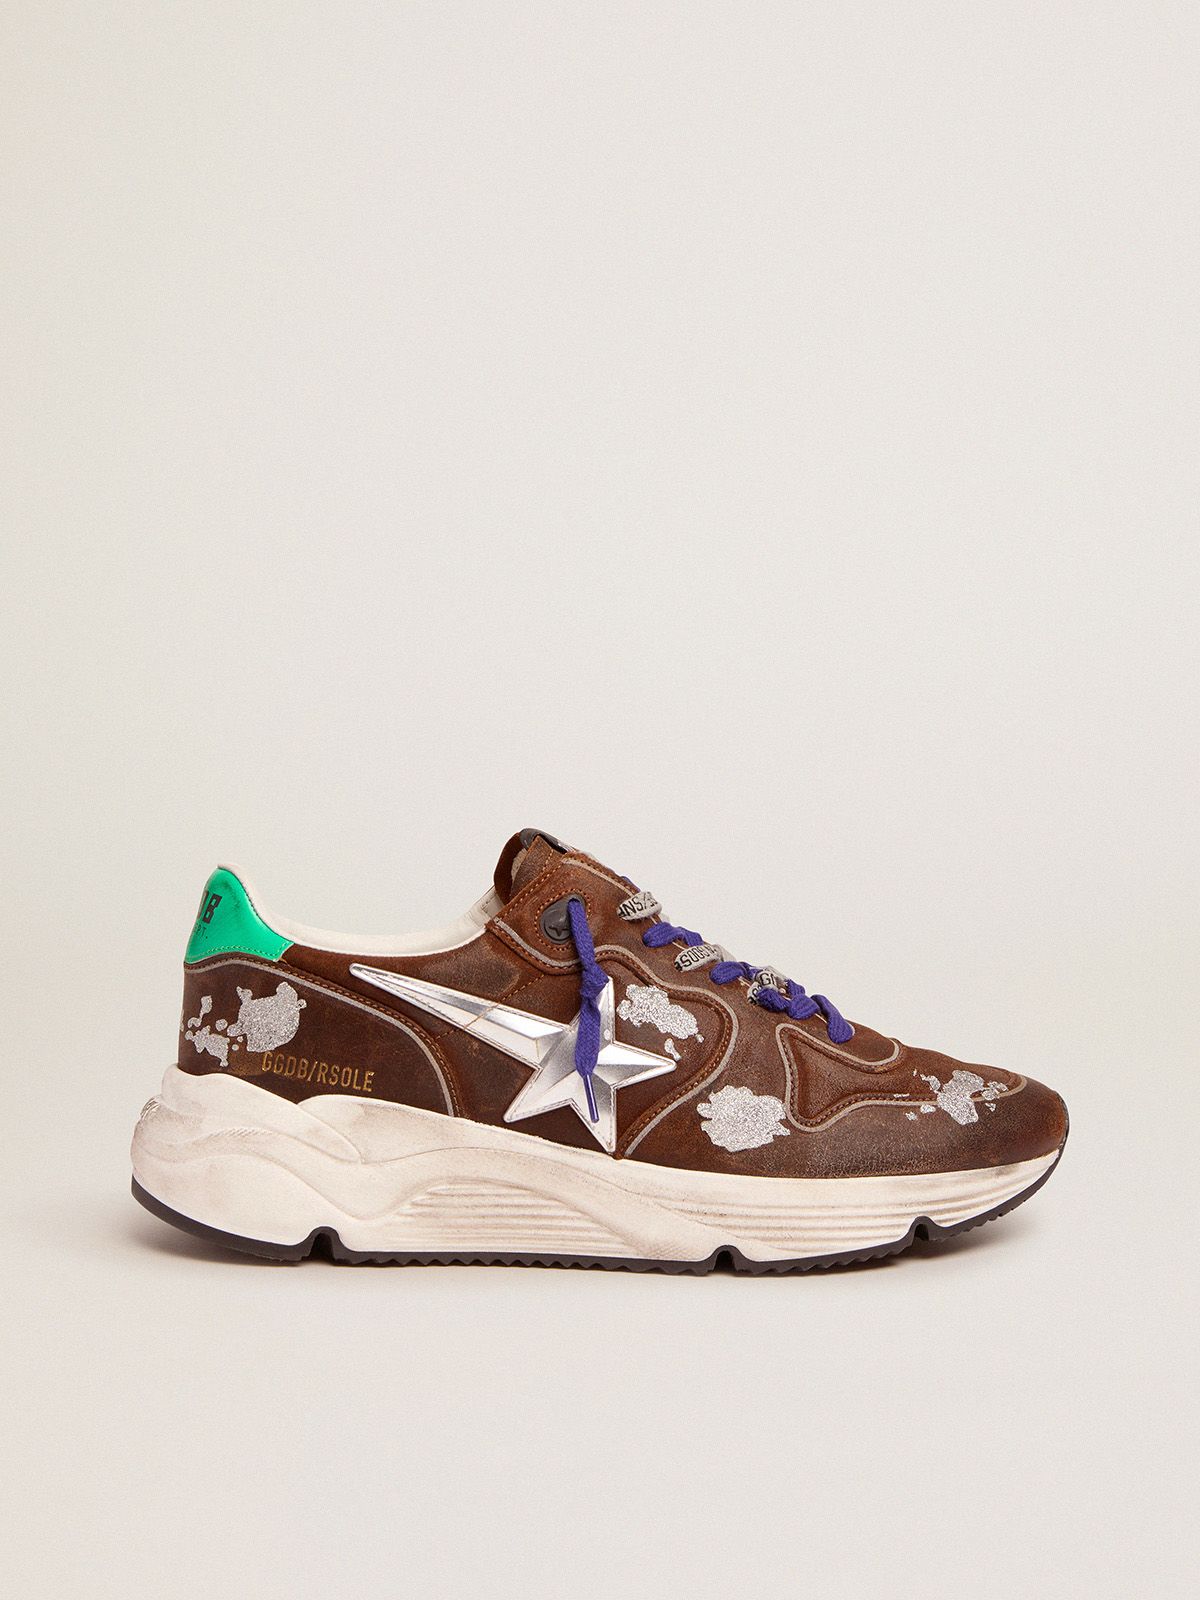 golden goose with sneakers Sole 3D in cognac-colored suede star Running